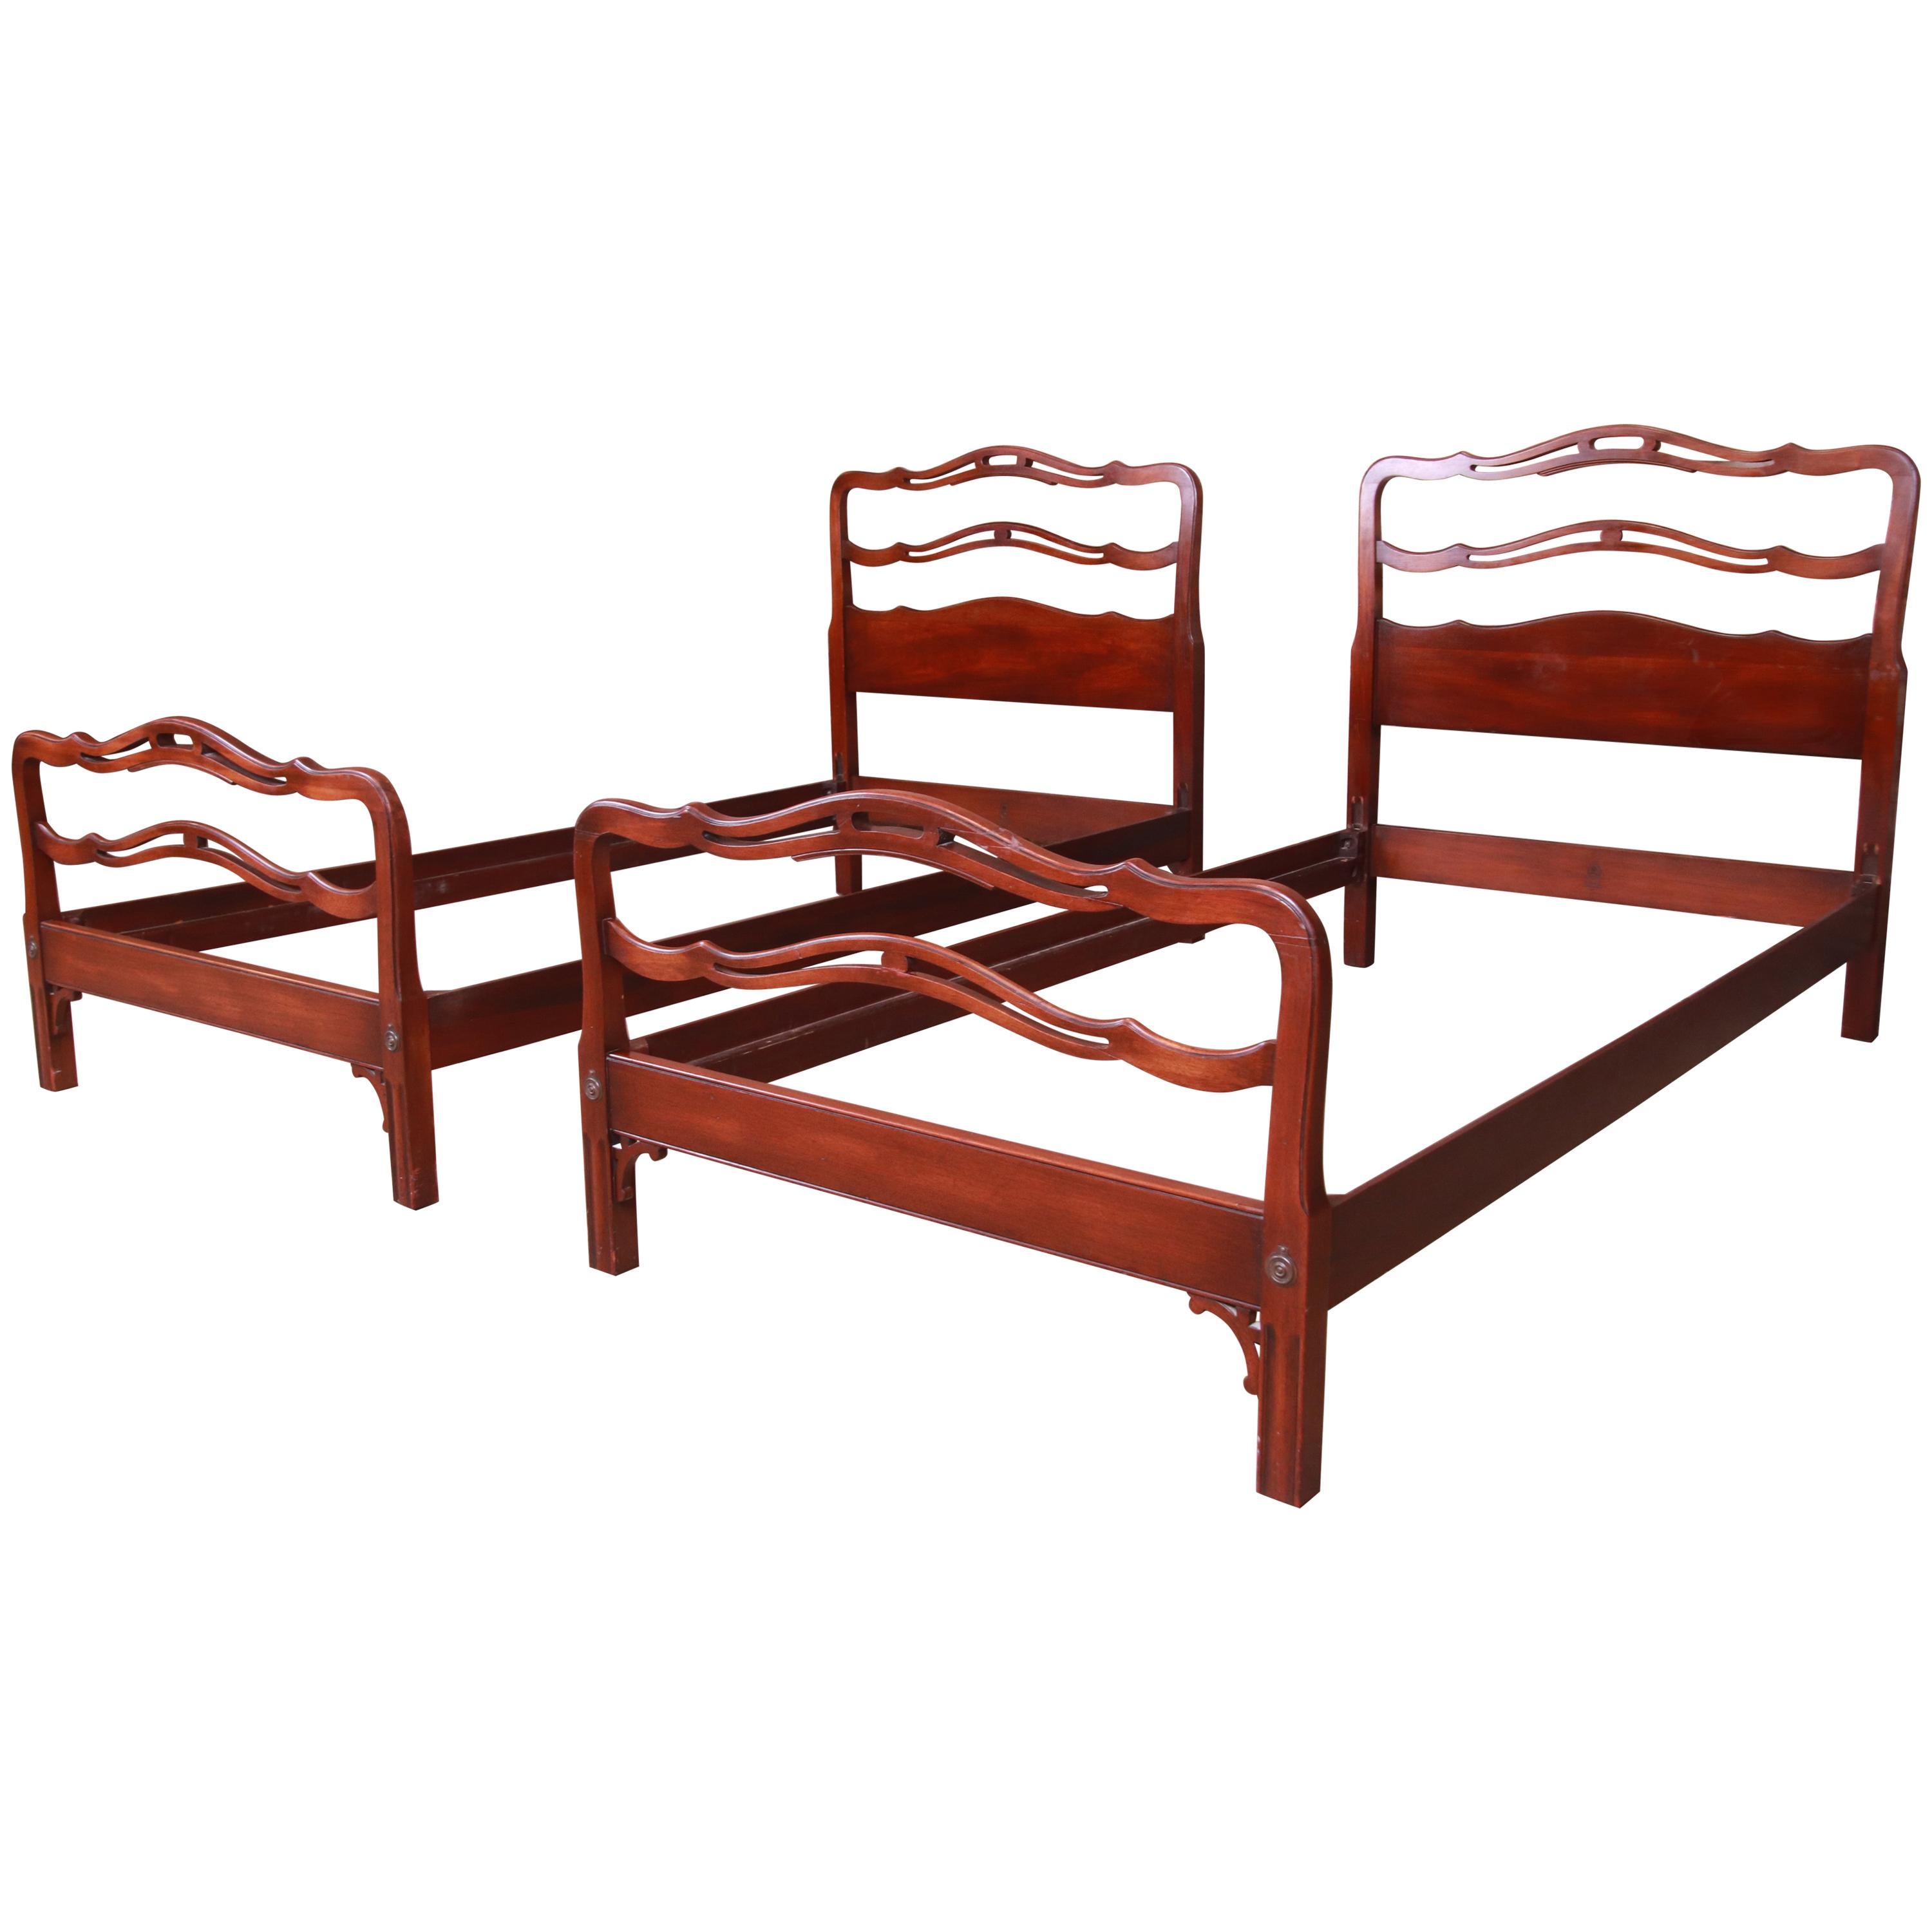 Kindel Furniture Chippendale Carved Mahogany Twin Beds, Pair